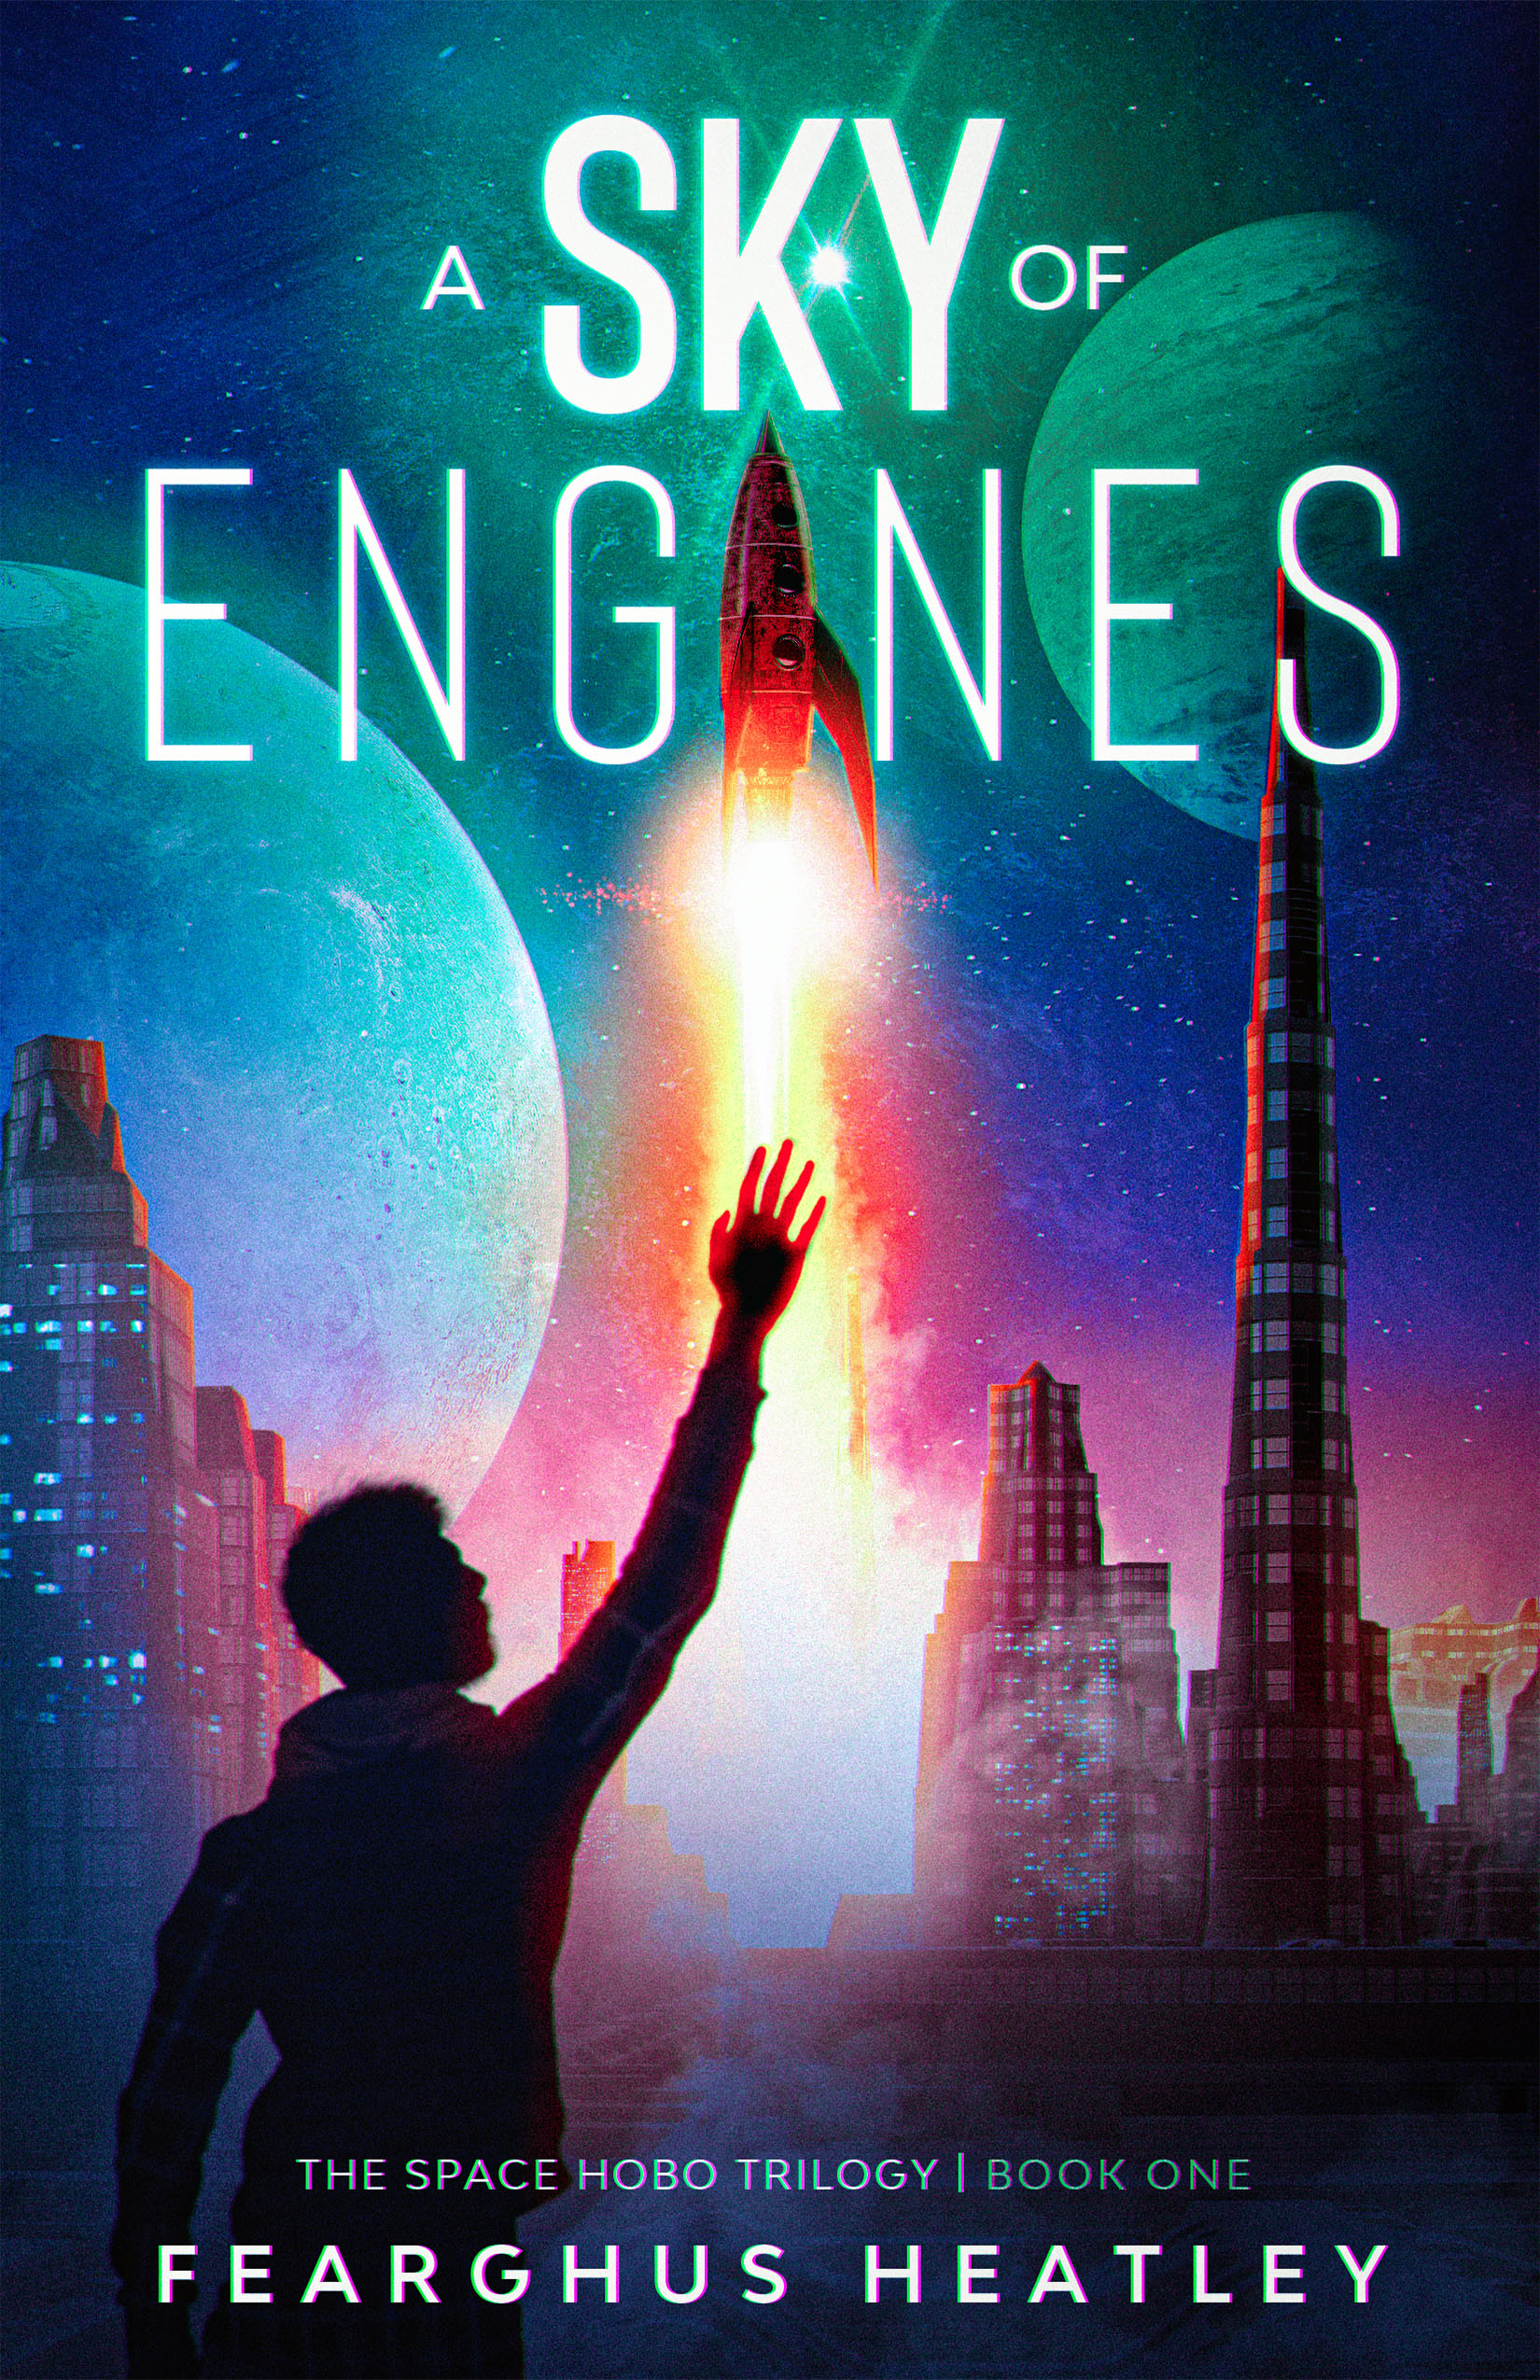 FREE: A Sky of Engines by Fearghus Heatley